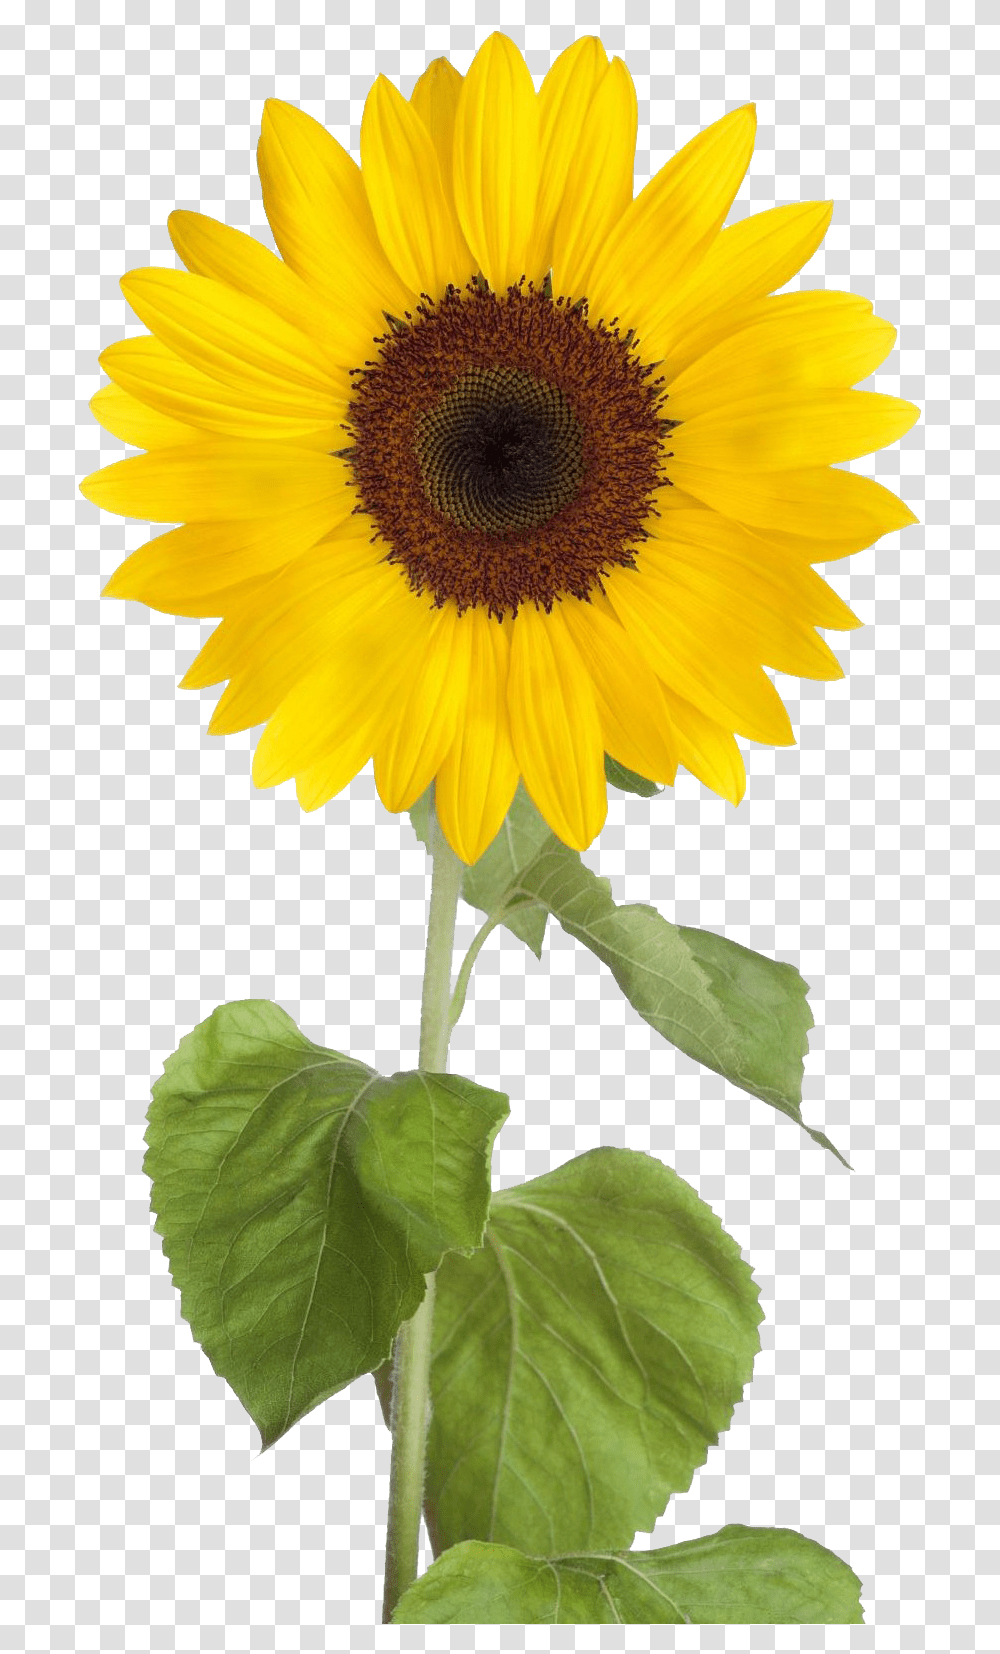 Sunflower Background Sunflowers Clipart Background, Plant, Blossom Transparent Png